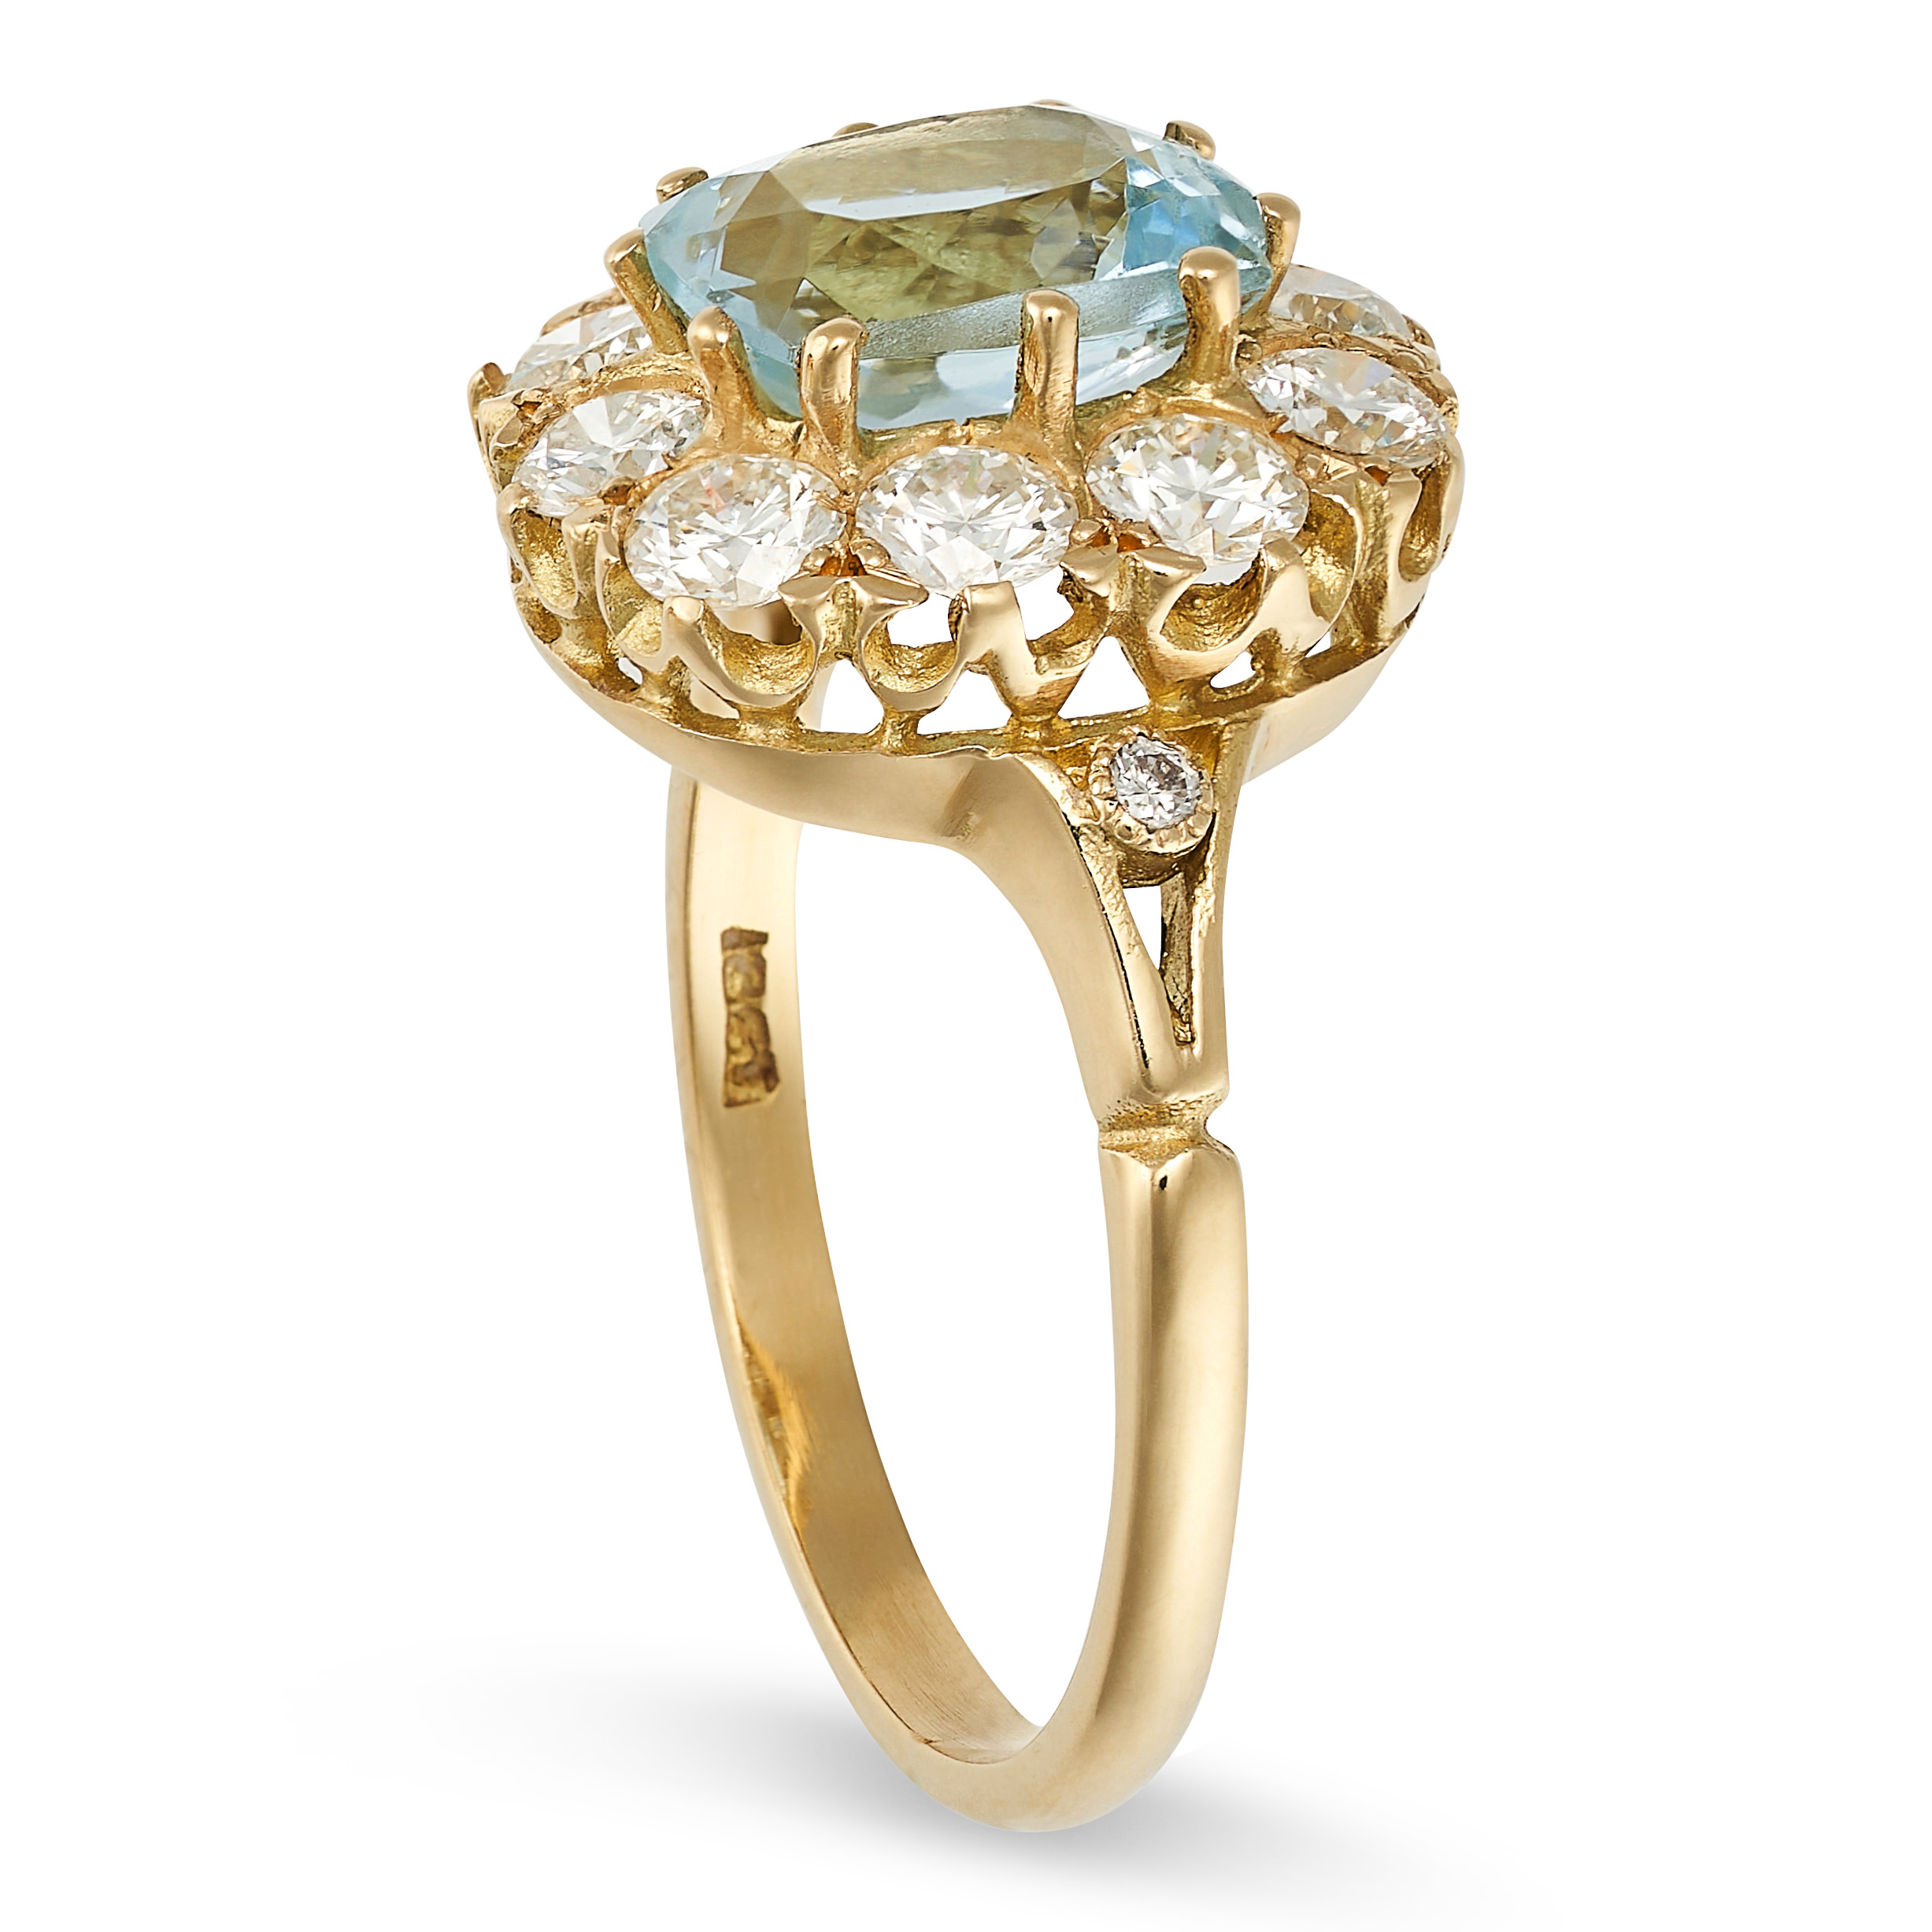 AN AQUAMARINE AND DIAMOND CLUSTER RING in 18ct yellow gold, set with a cushion cut aquamarine of ... - Image 2 of 2